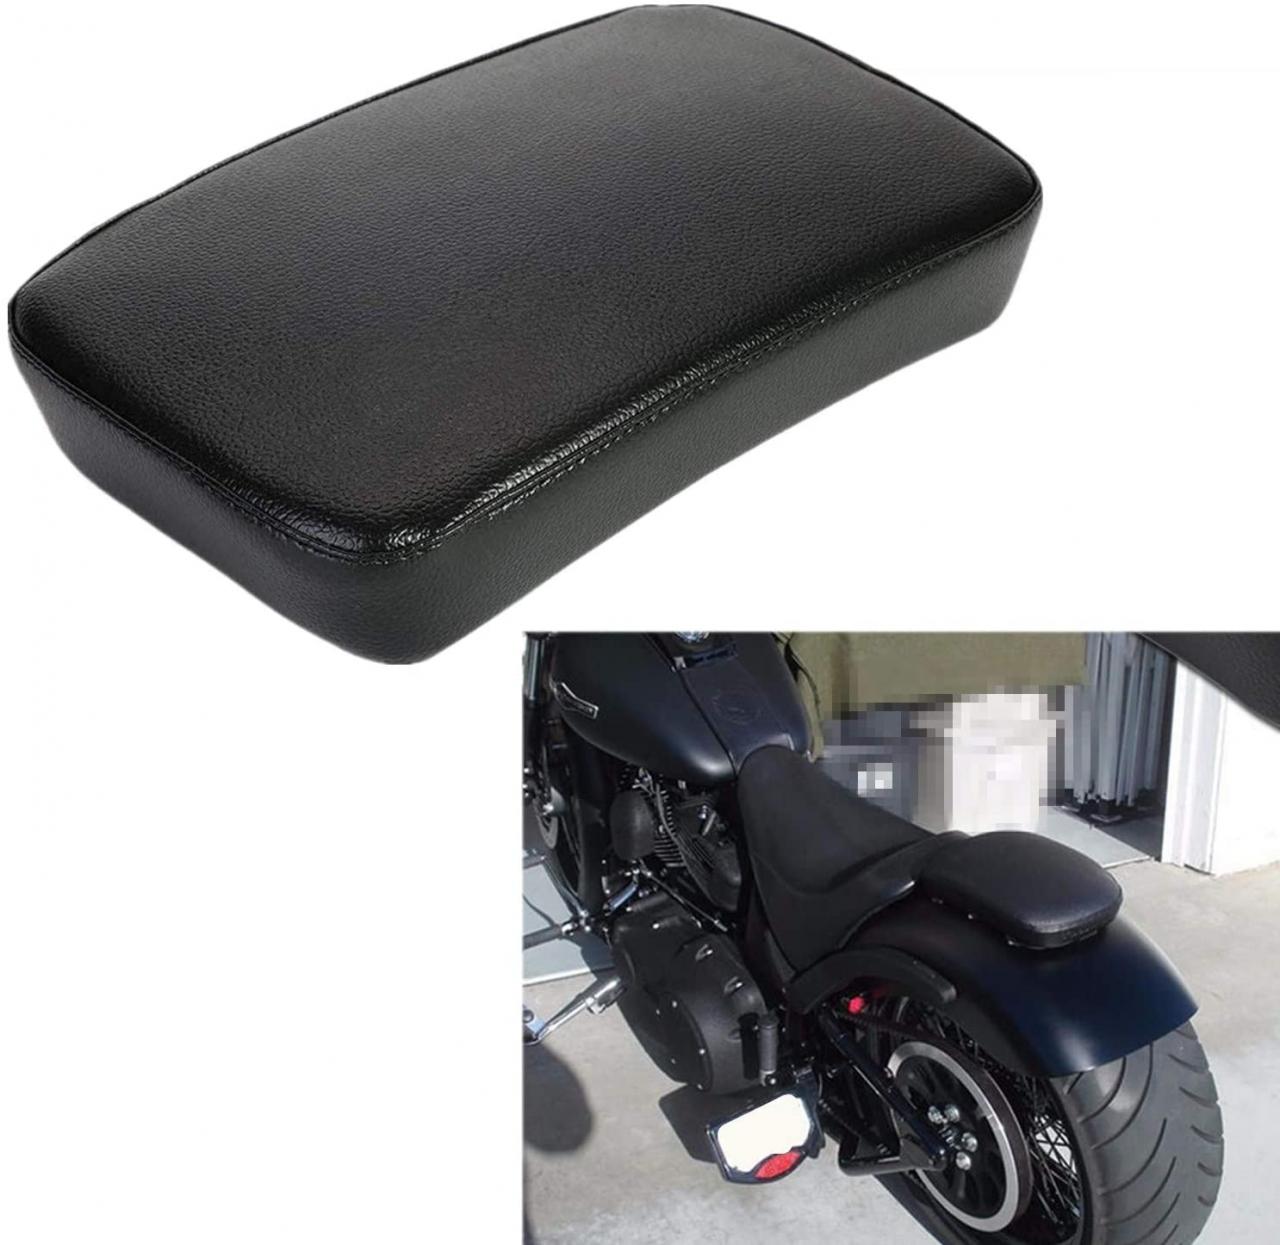 Buy OSAN Leather Pillion Pad w/ 6 Suction Cup Rear Passenger Seat For  Harley Custom Bikes Online in Taiwan. B014GZA680